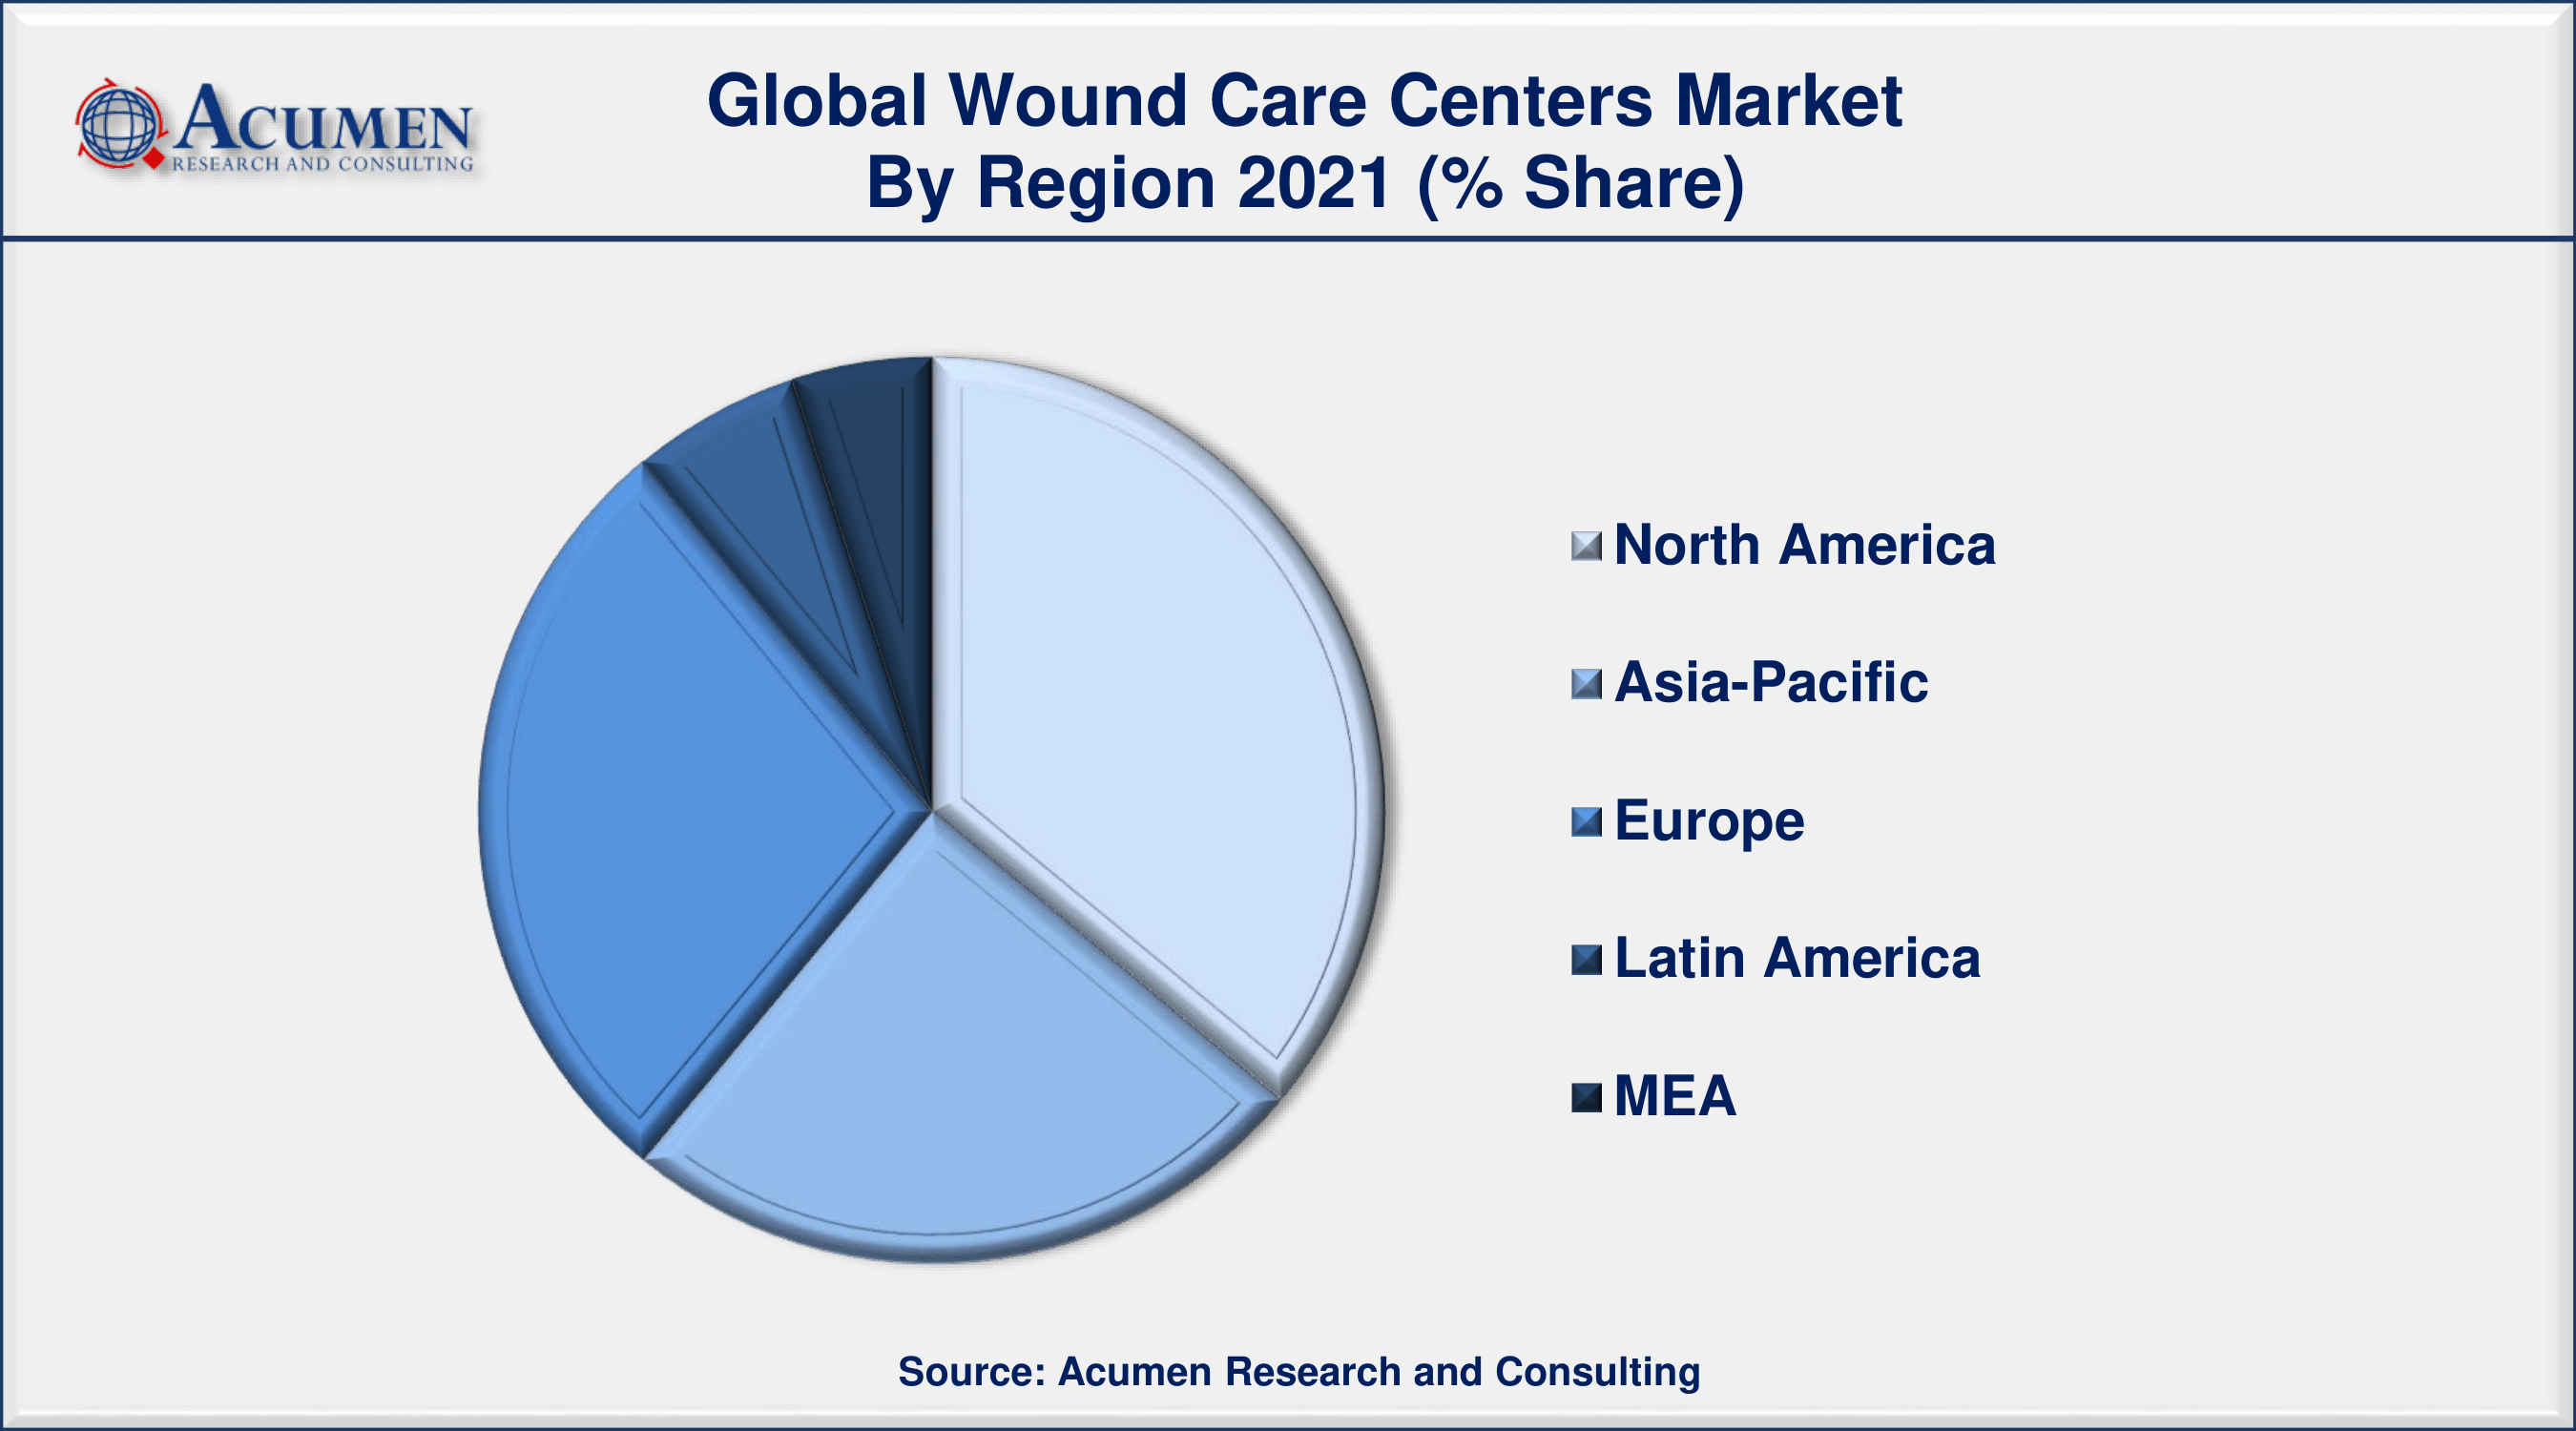 North America wound care centers market accounting for nearly 35% of the total market share in 2021